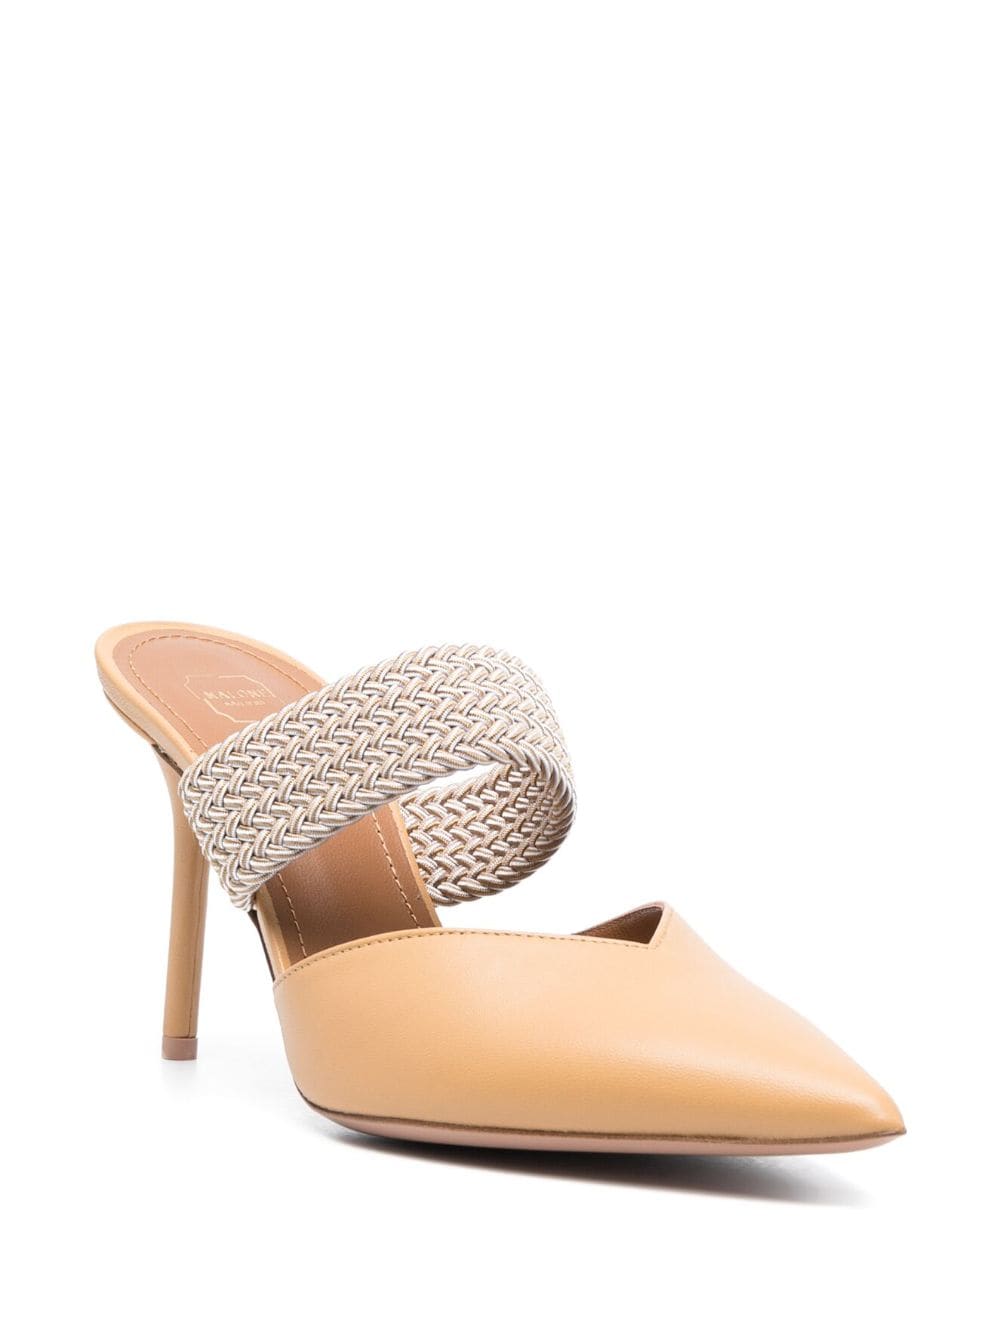 Malone Souliers Maisie 90mm leather mules - Beige